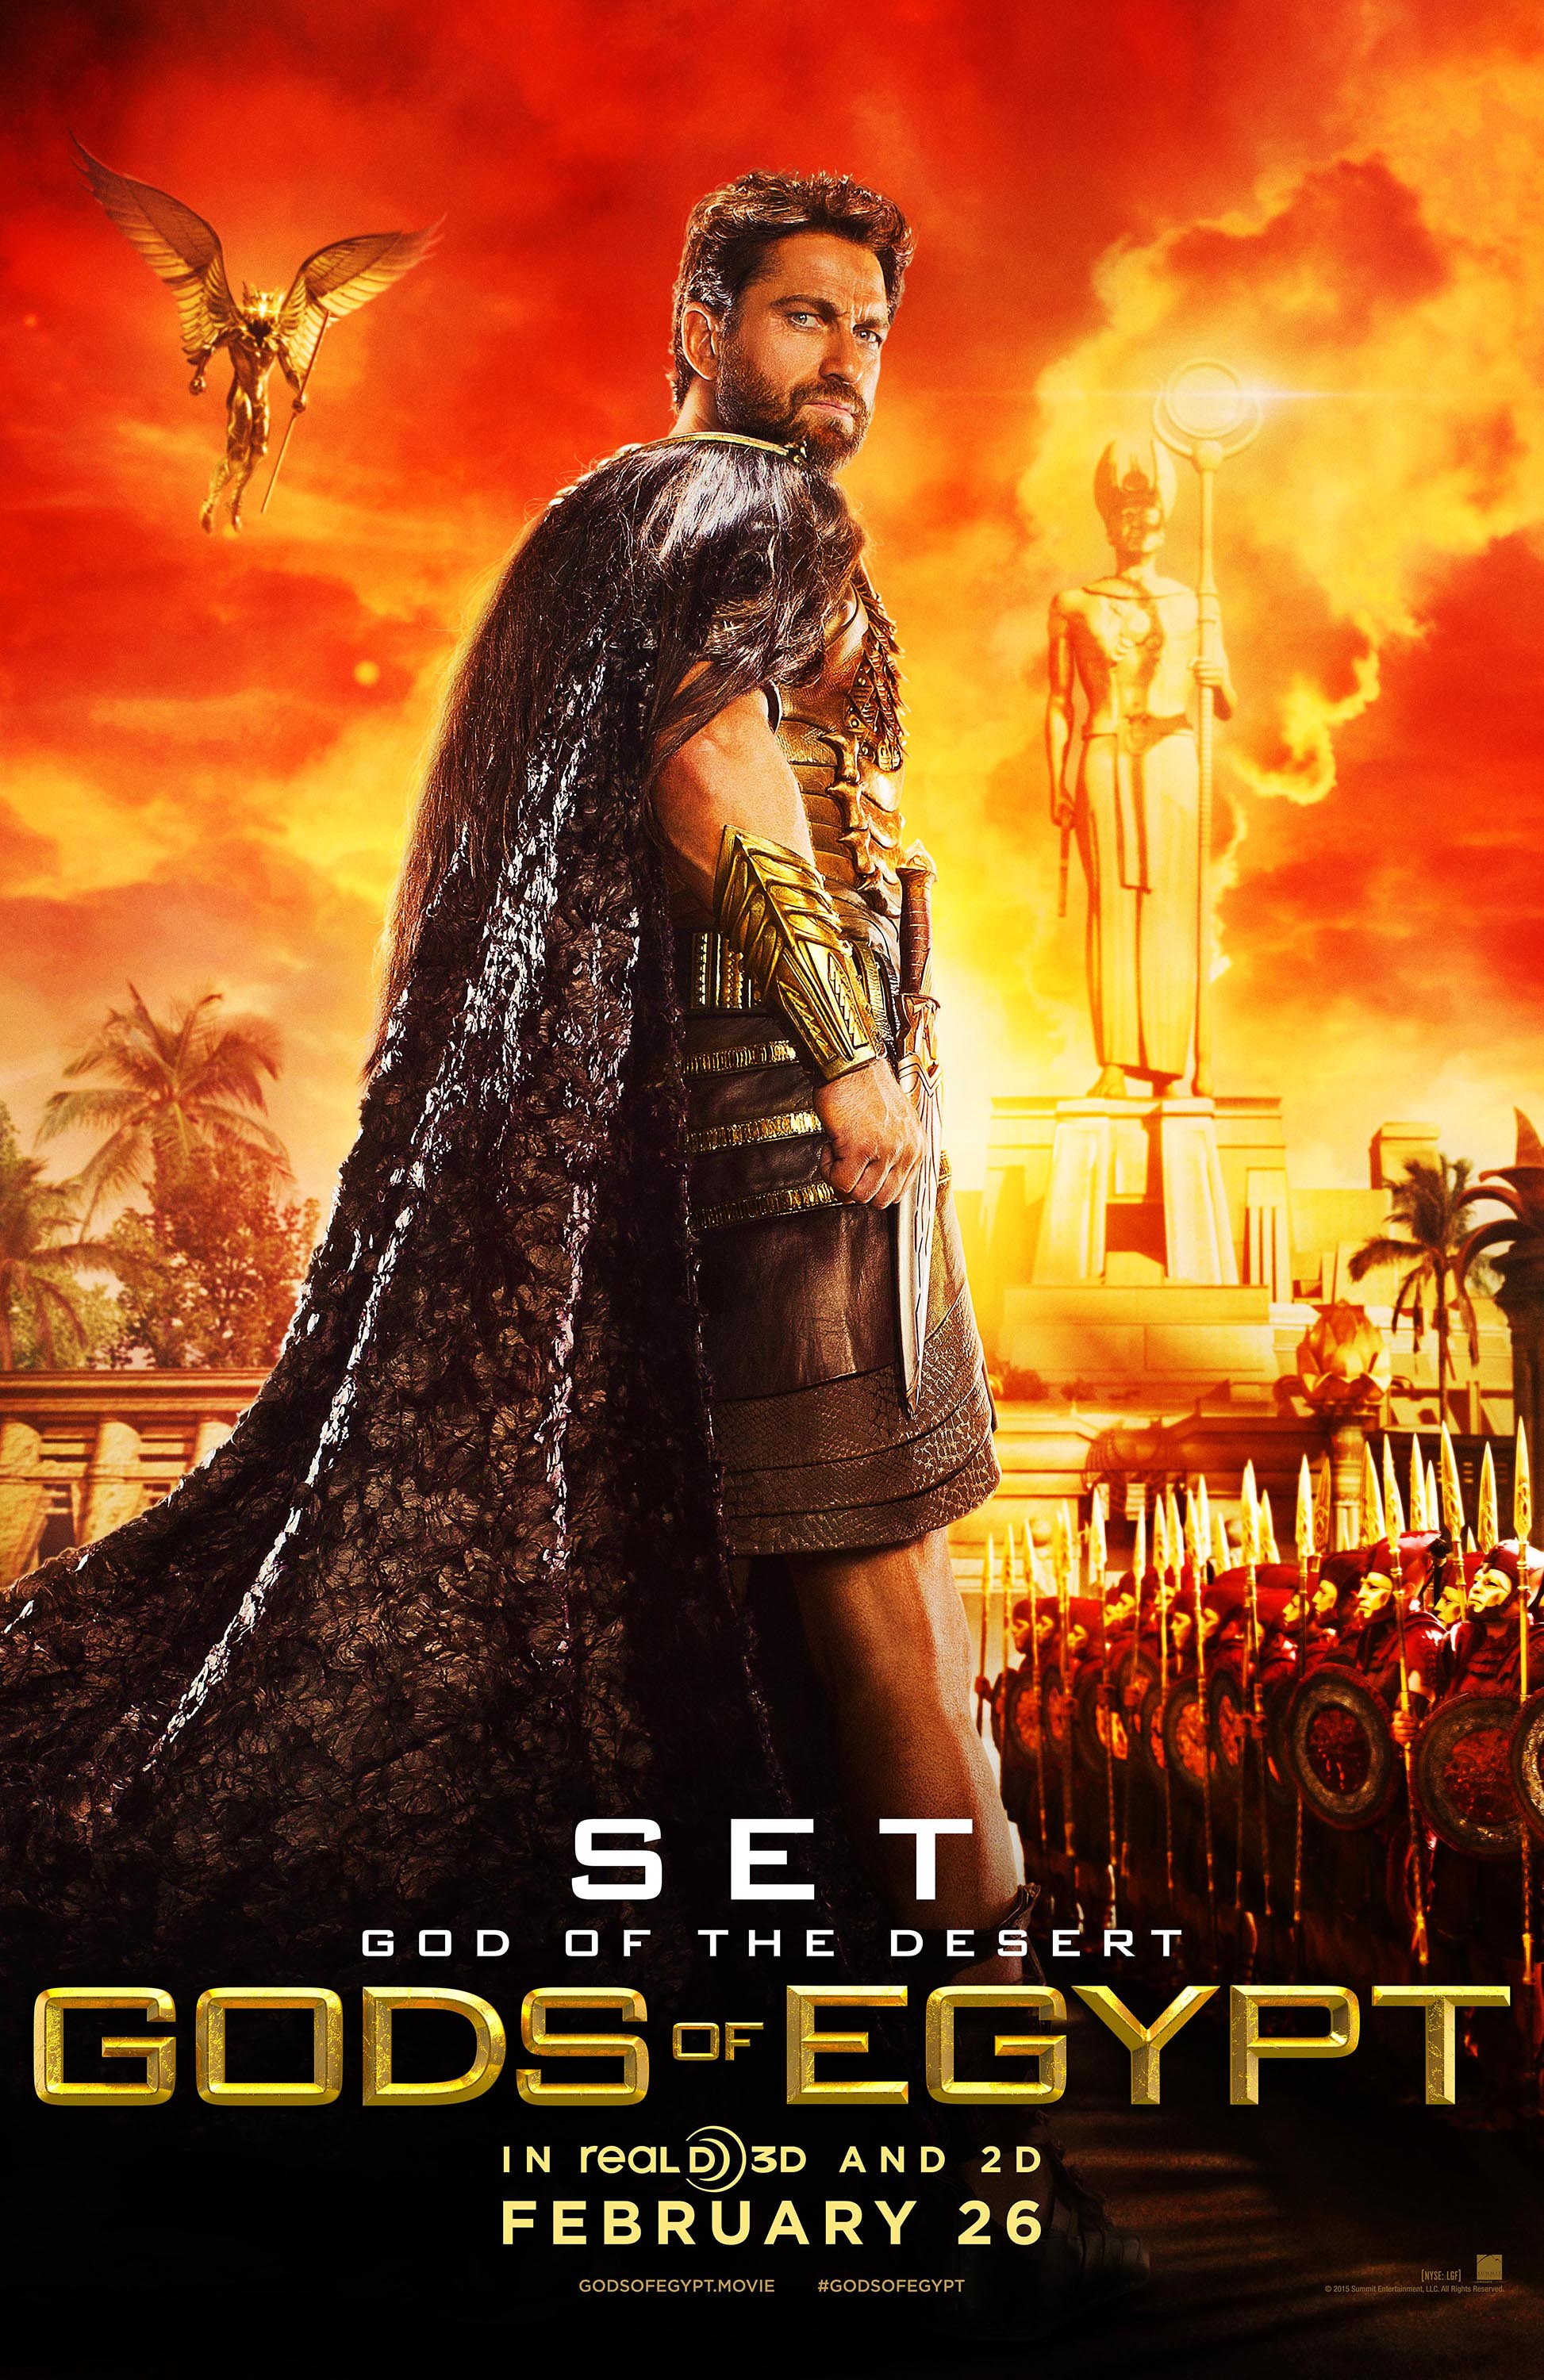 Gods Of Egypt Backgrounds, Compatible - PC, Mobile, Gadgets| 1946x3000 px